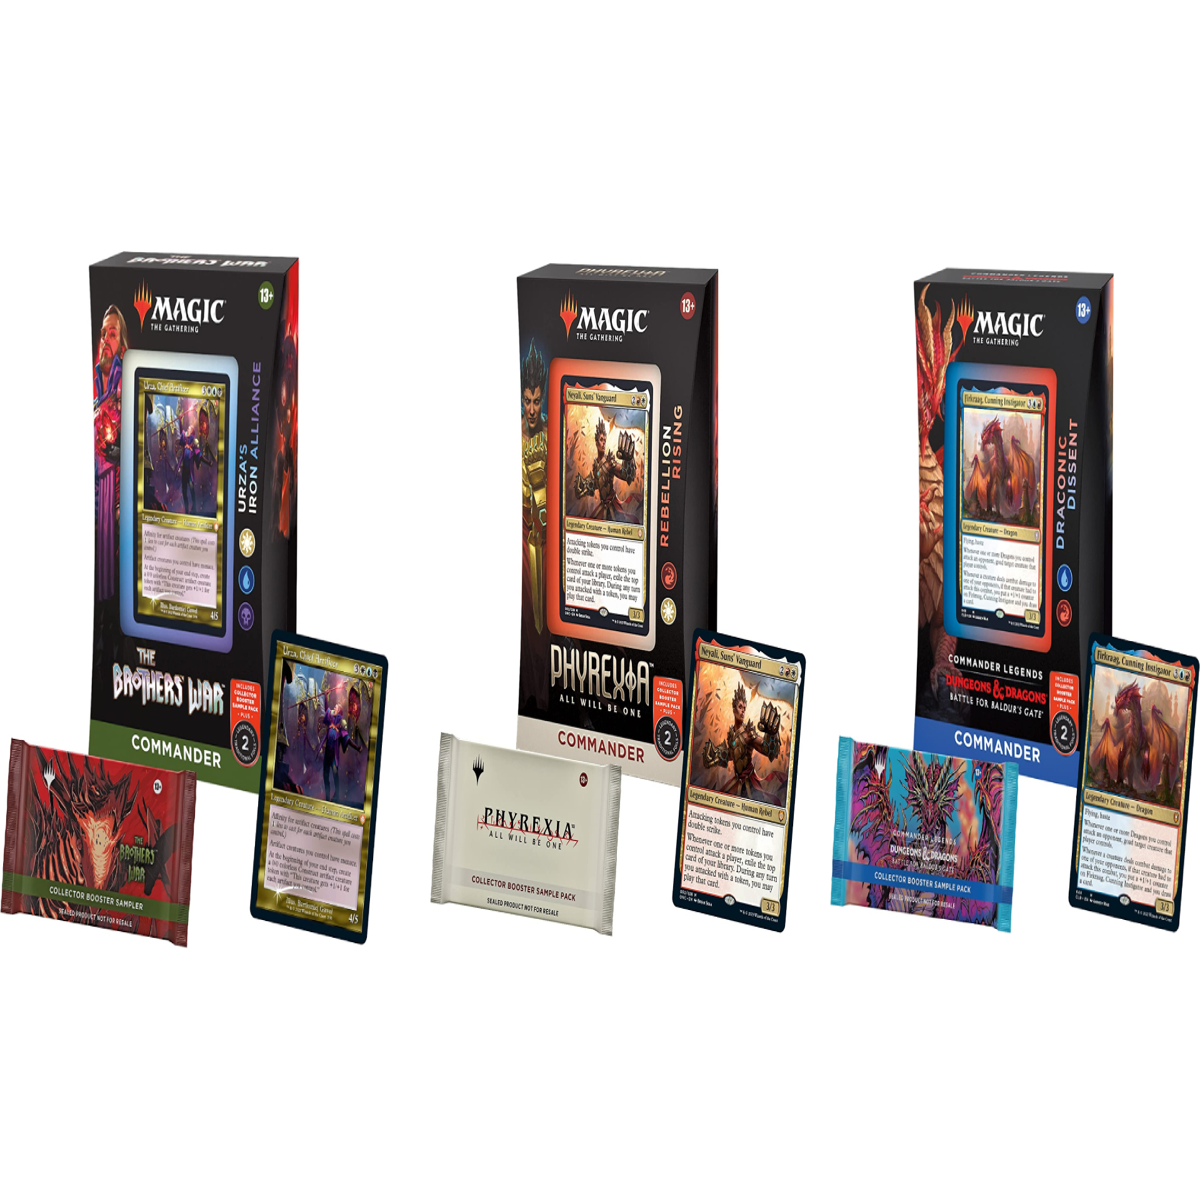 https://assetsio.reedpopcdn.com/magic-the-gathering-best-value-commander-precons-(1).jpg?width=1200&height=1200&fit=crop&quality=100&format=png&enable=upscale&auto=webp